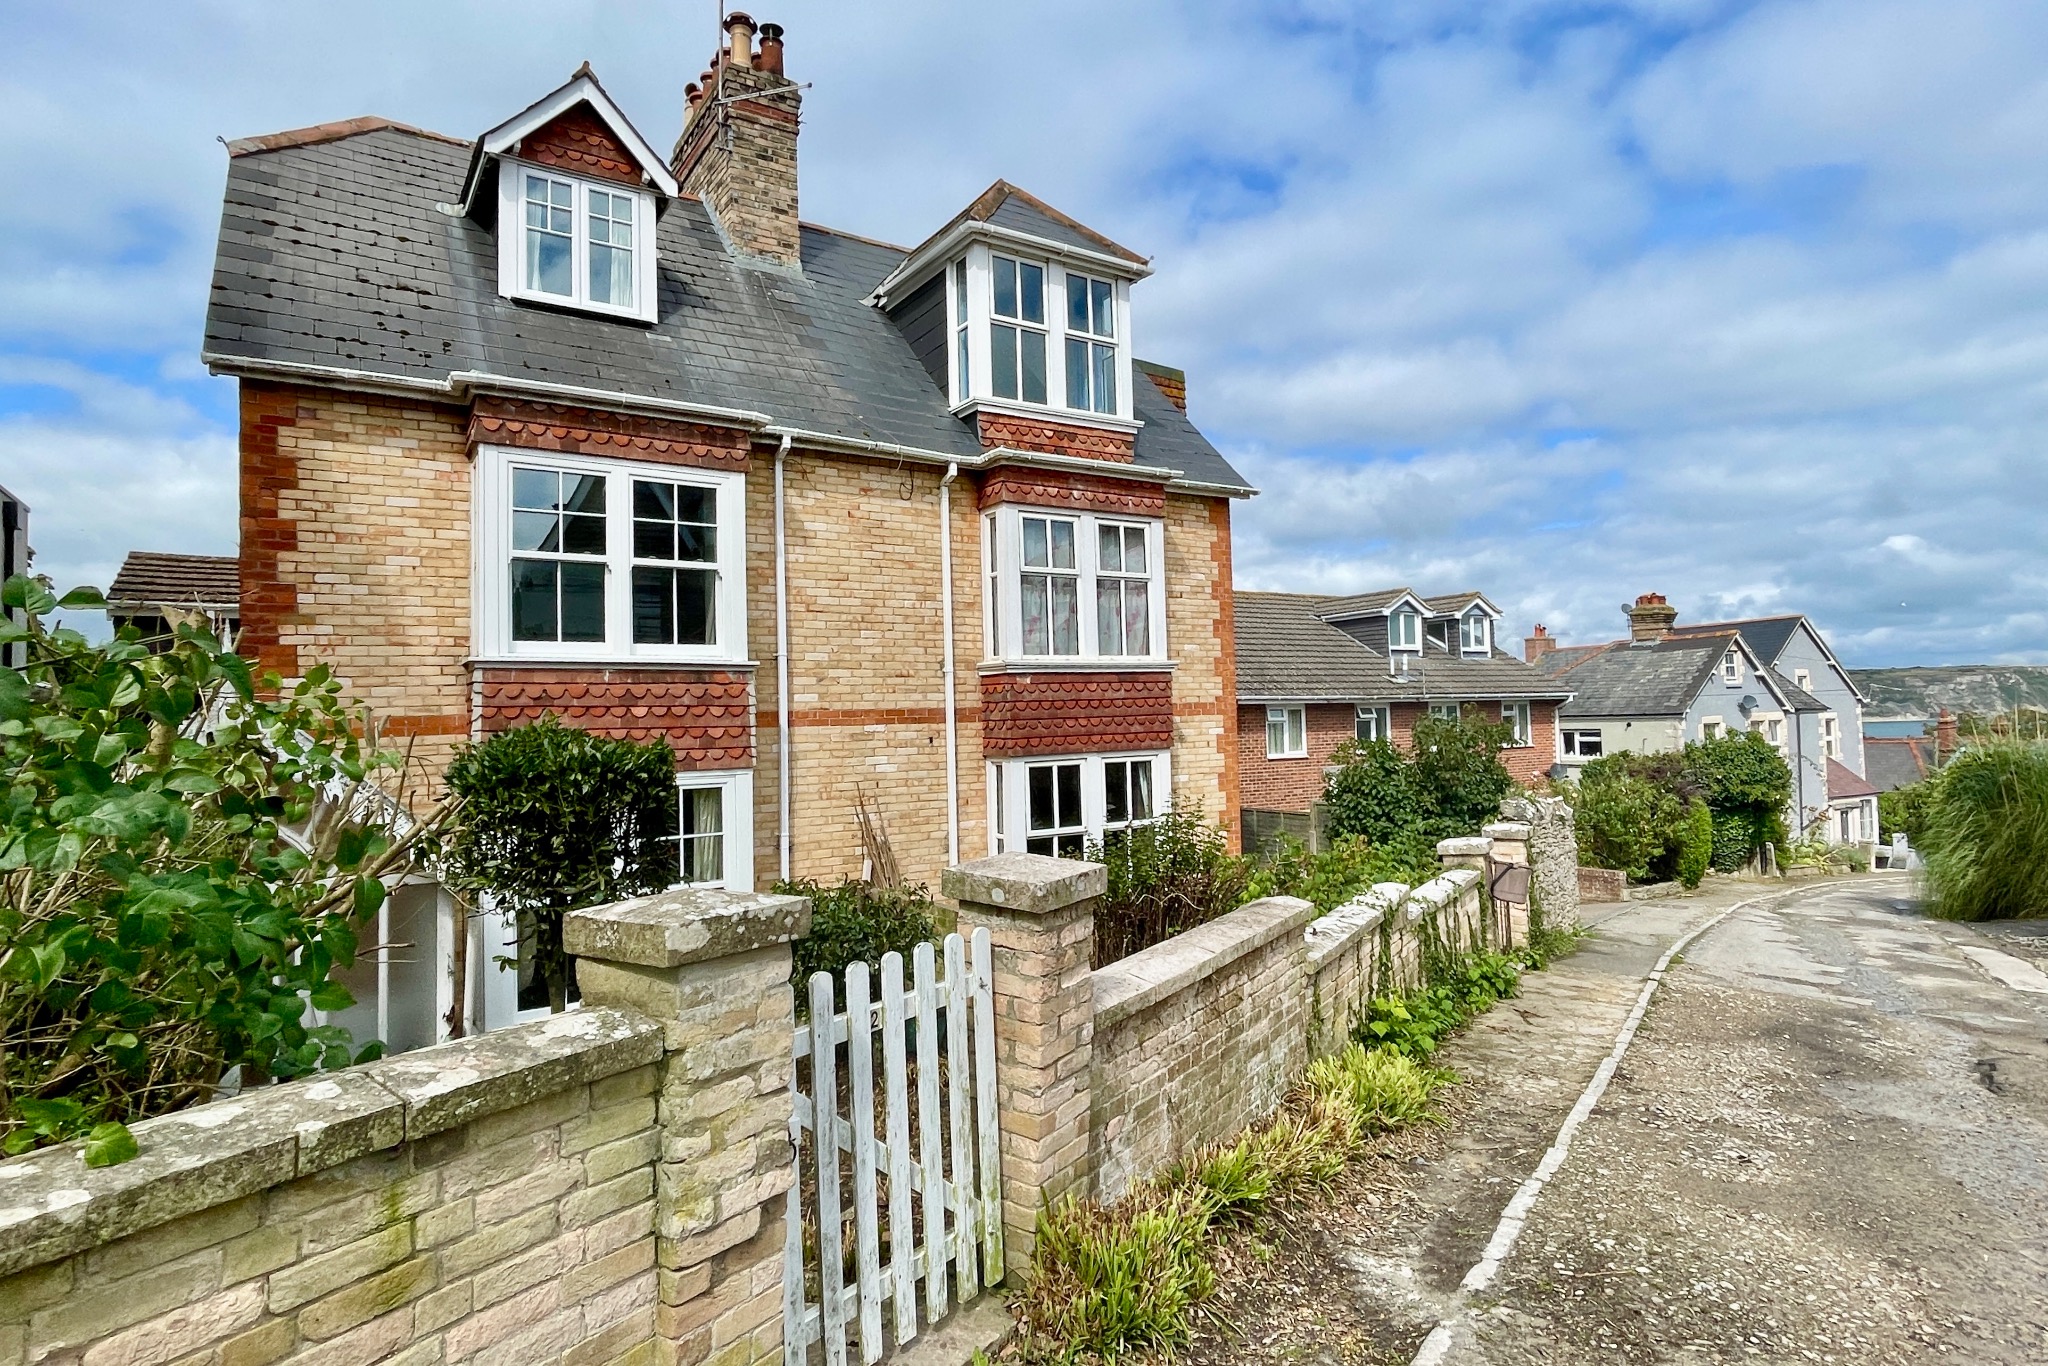 PURBECK TERRACE ROAD, SWANAGE